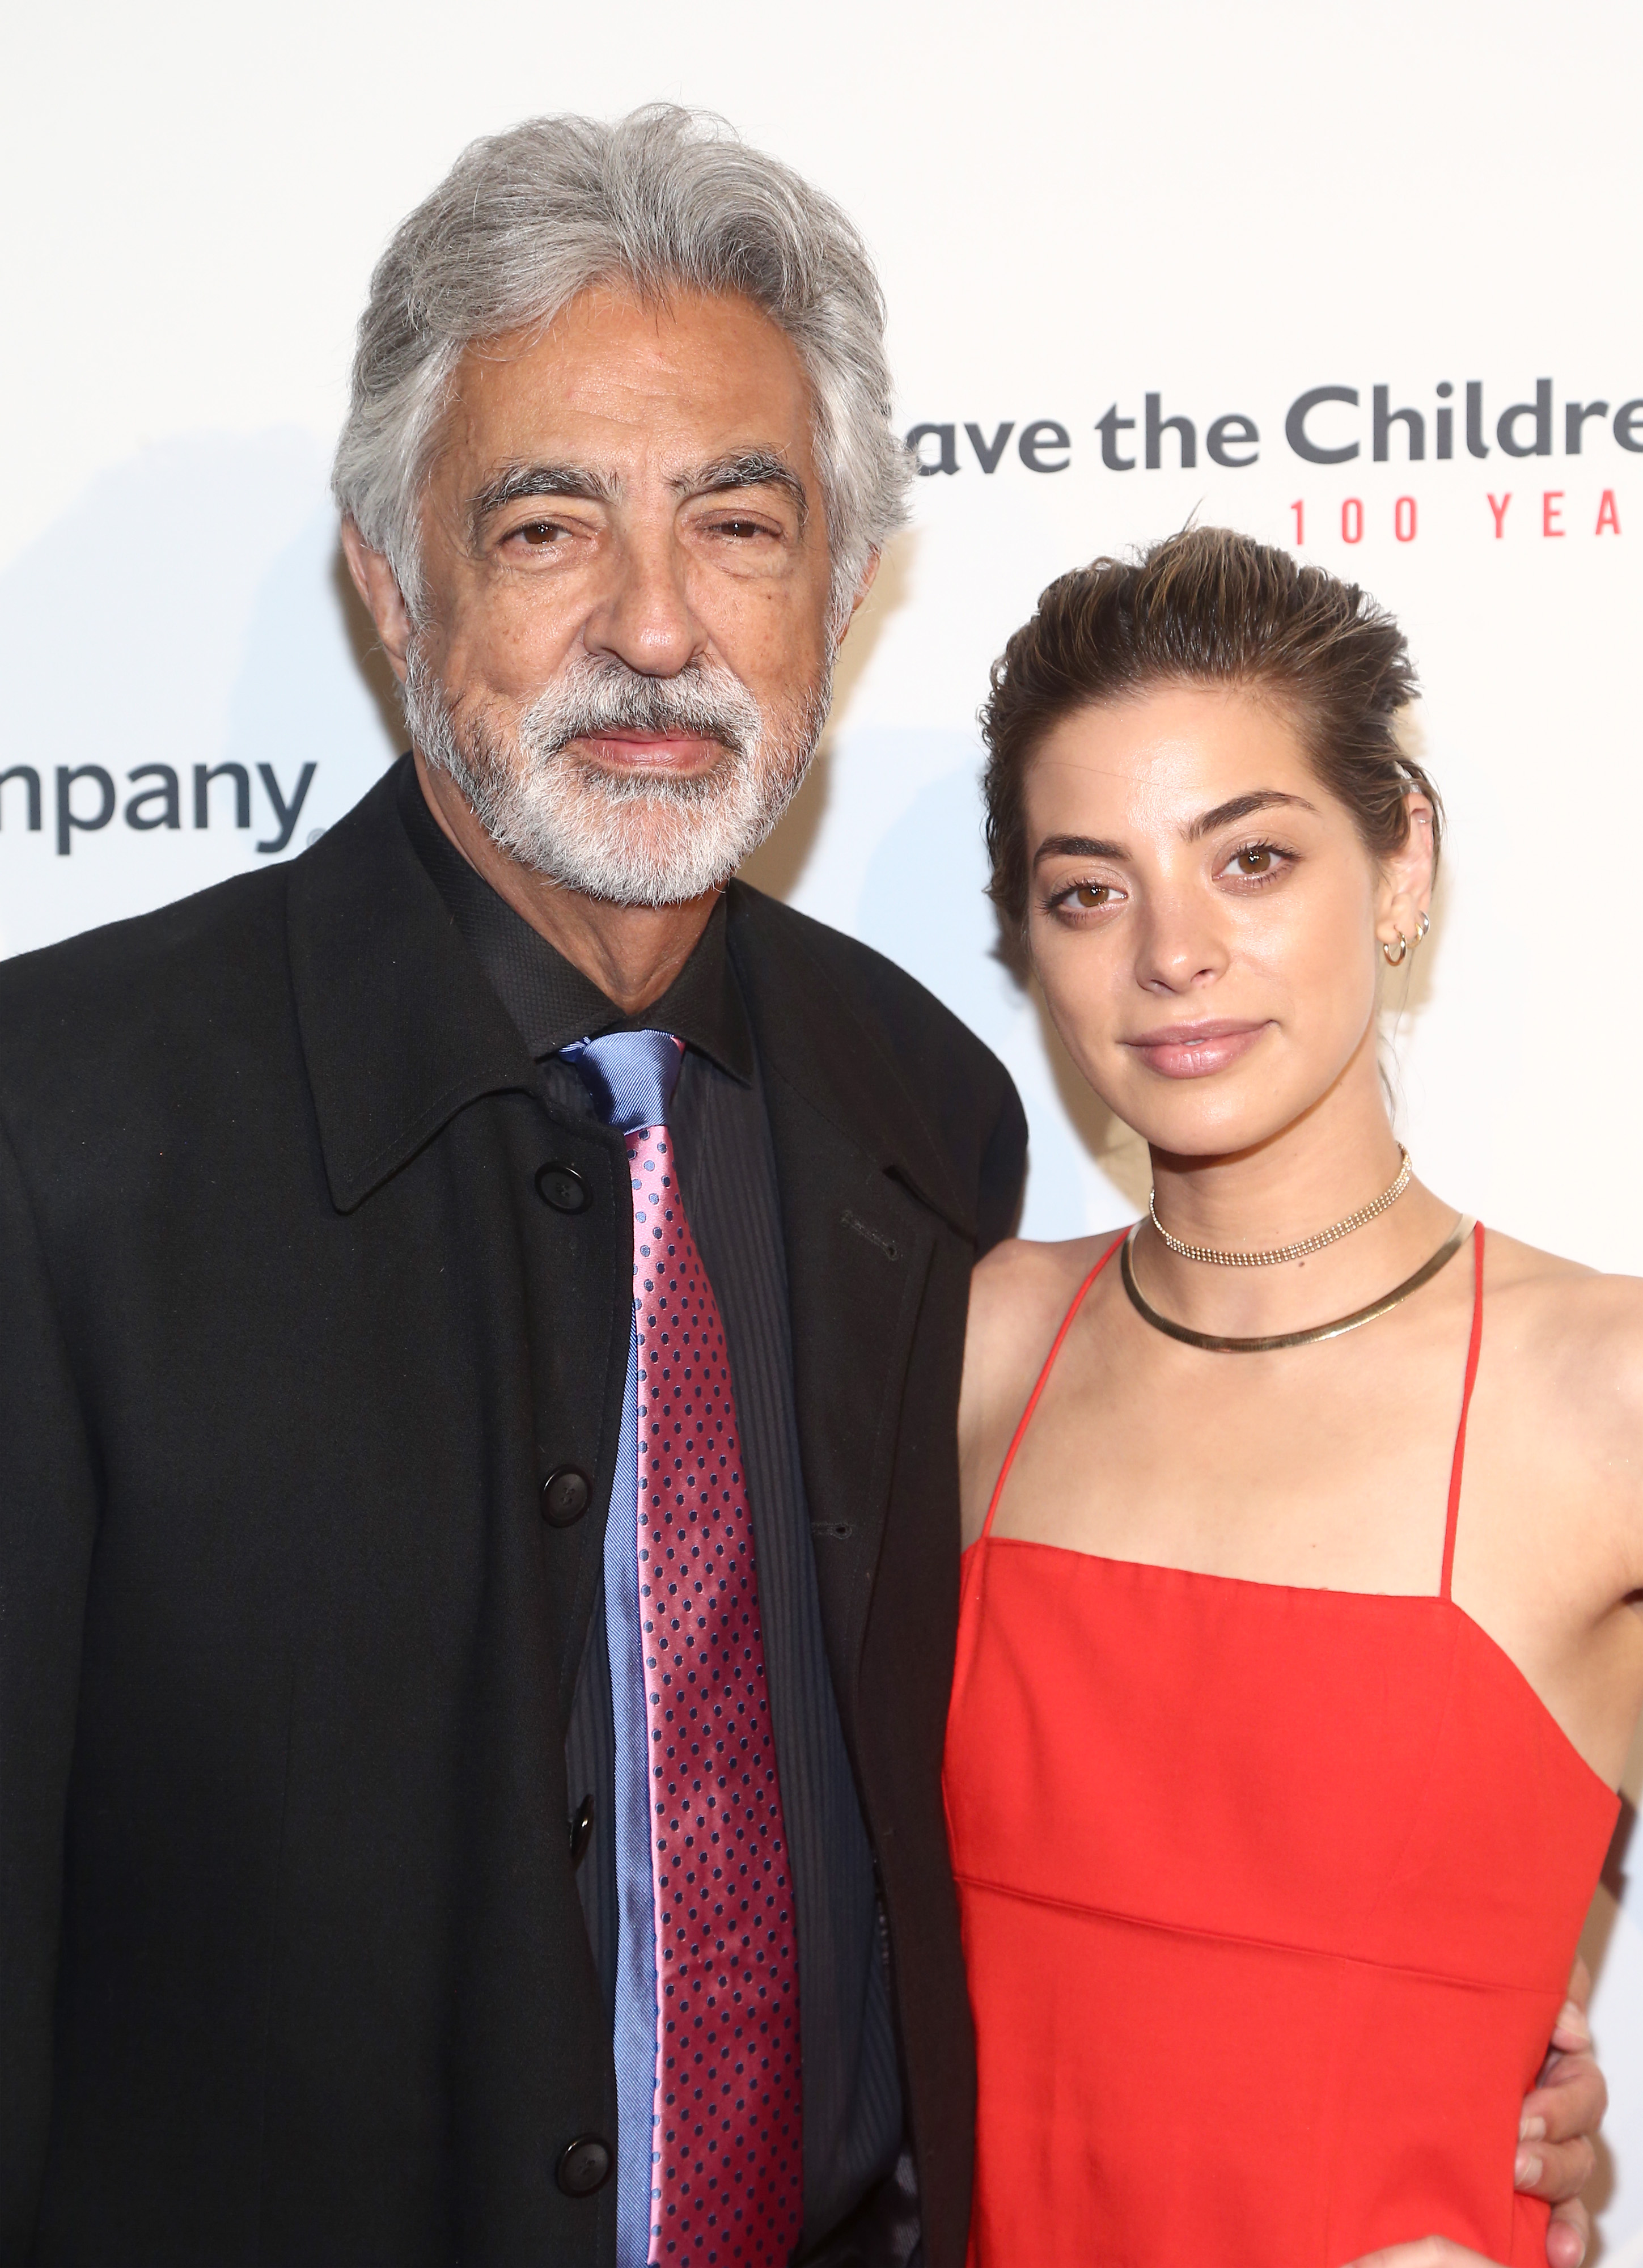 Joe Mantegna and Gia Mantegna attend Save The Children's Centennial Celebration: Once in a Lifetime at The Beverly Hilton Hotel on October 2, 2019, in Beverly Hills, California. | Source: Getty Images